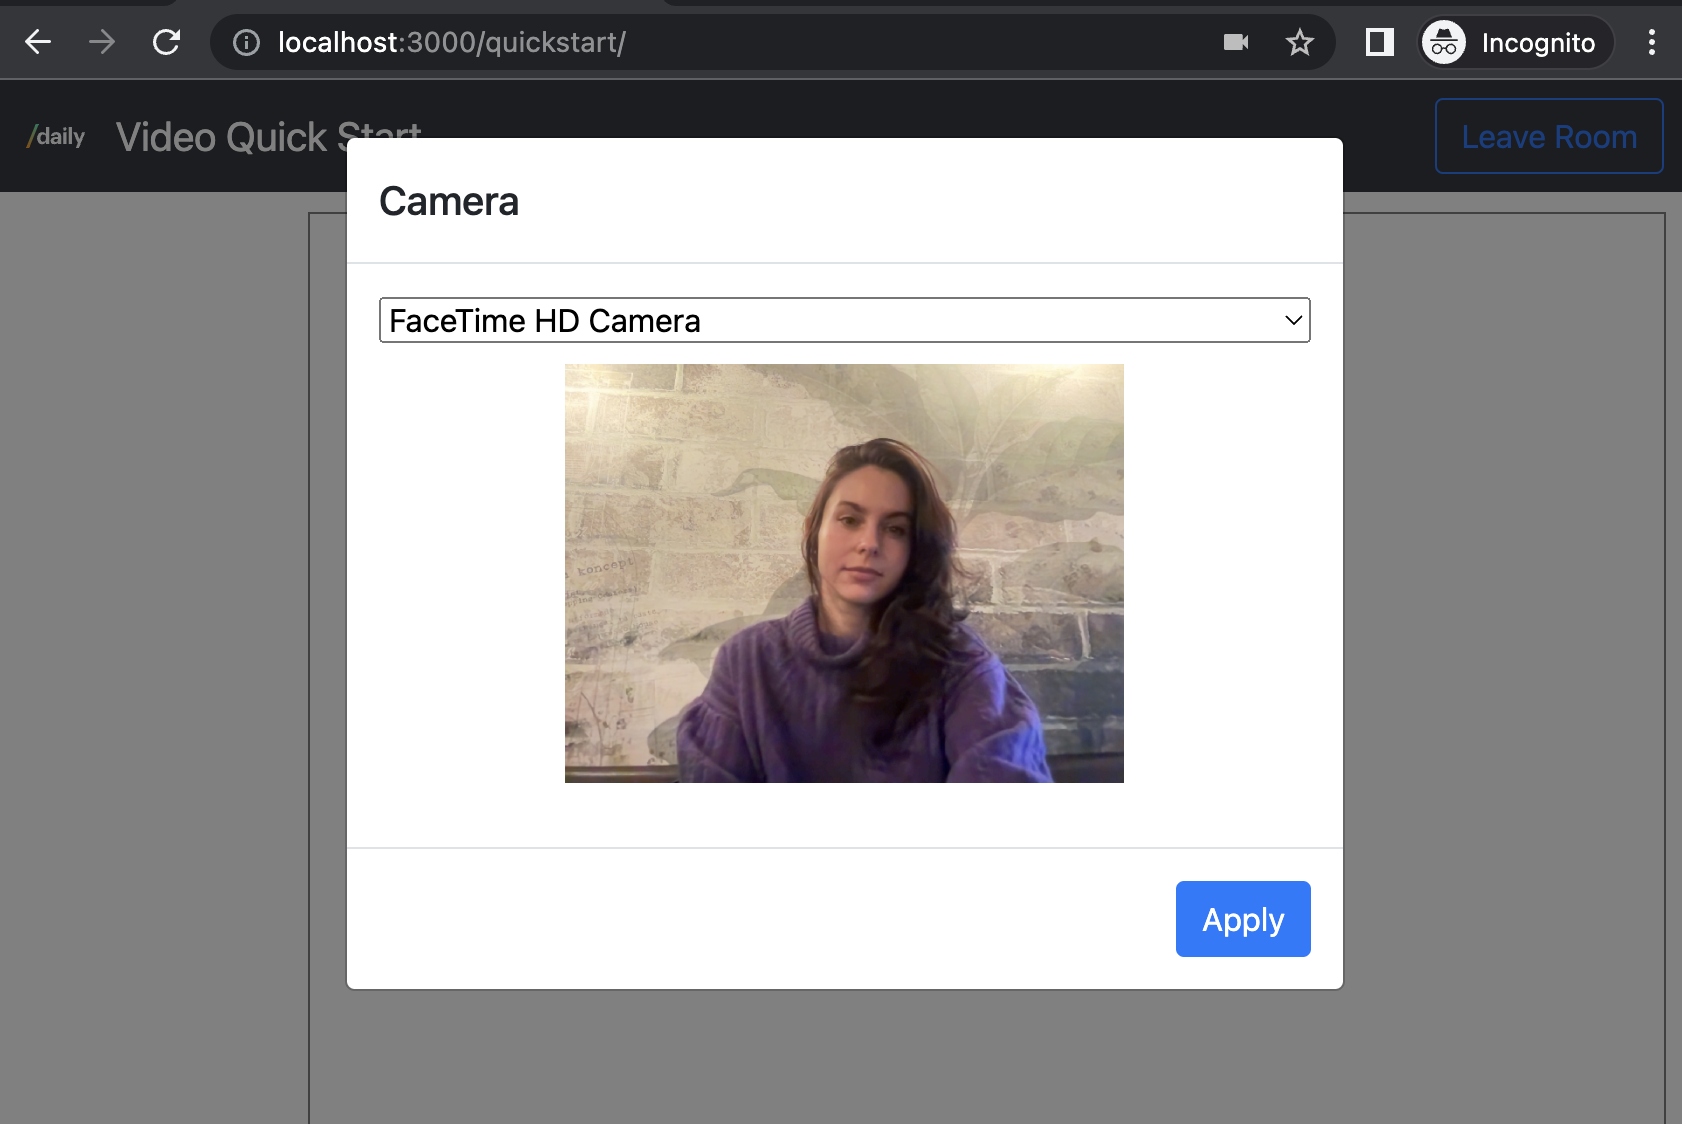 Video call application entry point, pre-join UI showing camera selection